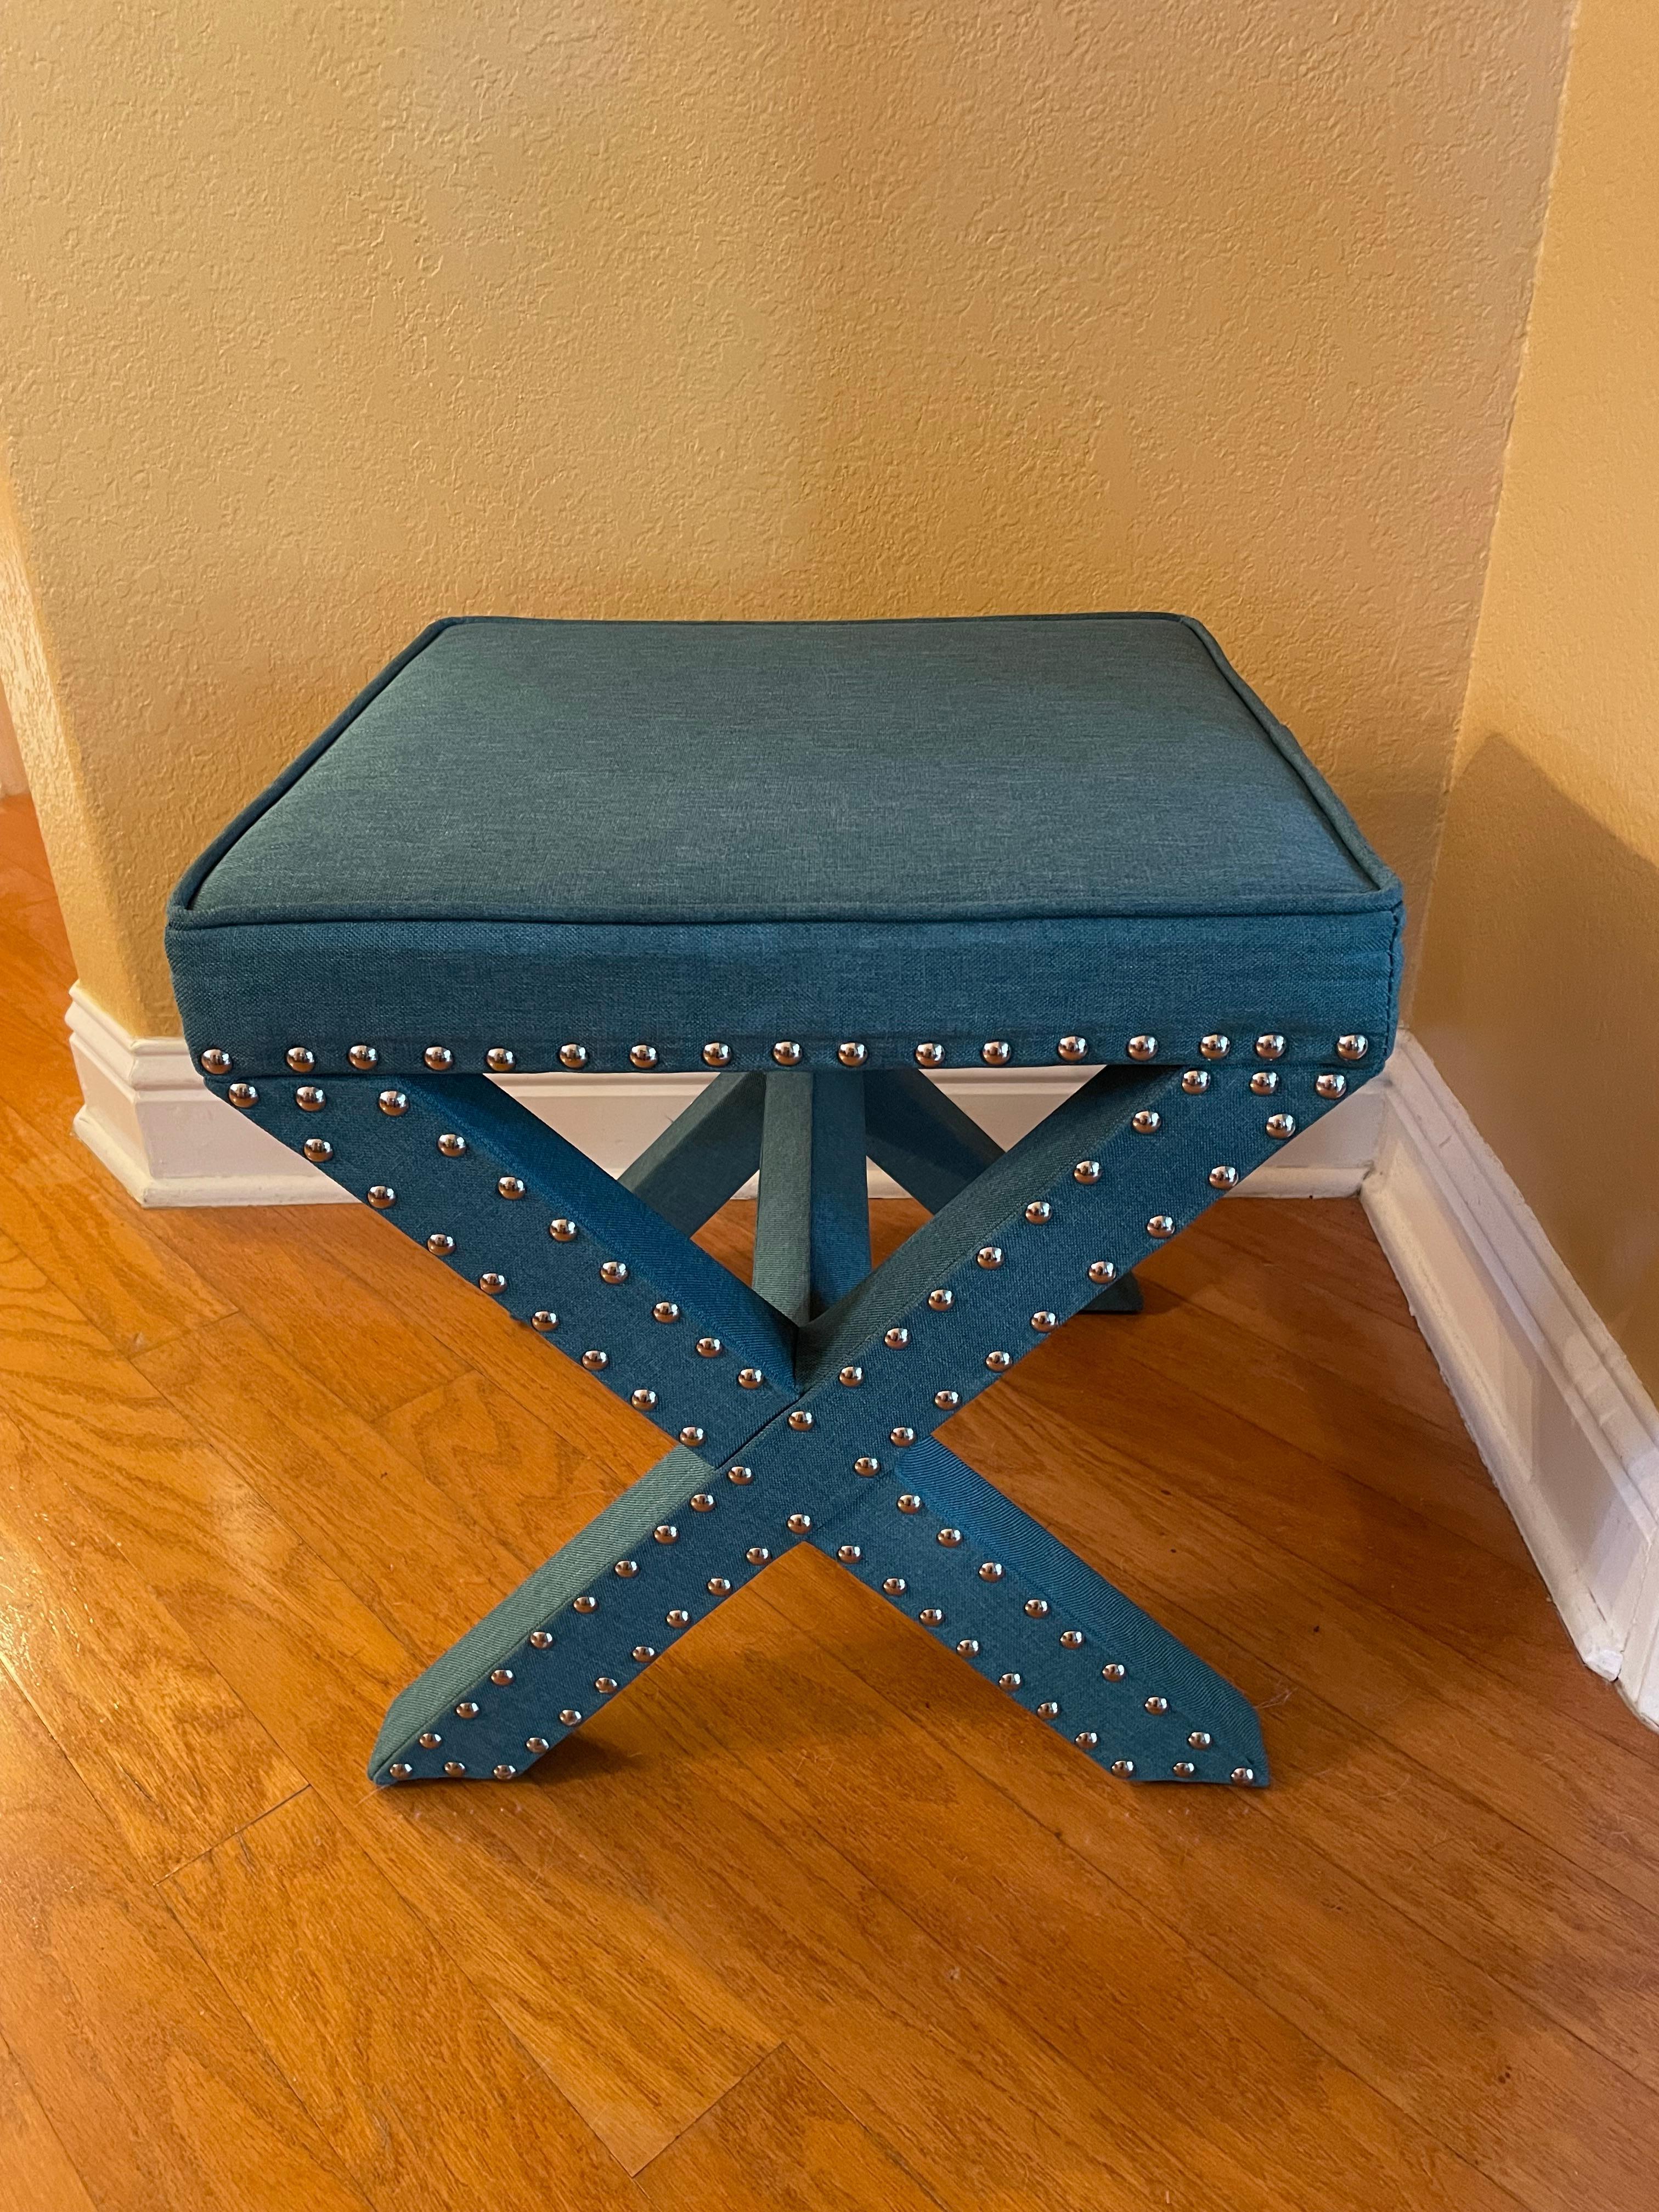 This versatile and iconic X bench is like new. It's more of a deep blue-green turquoise color with silver nail heads that run along the outside of the entire bench. The X Bench is proportioned so well. I think this is part of its enduring appeal.